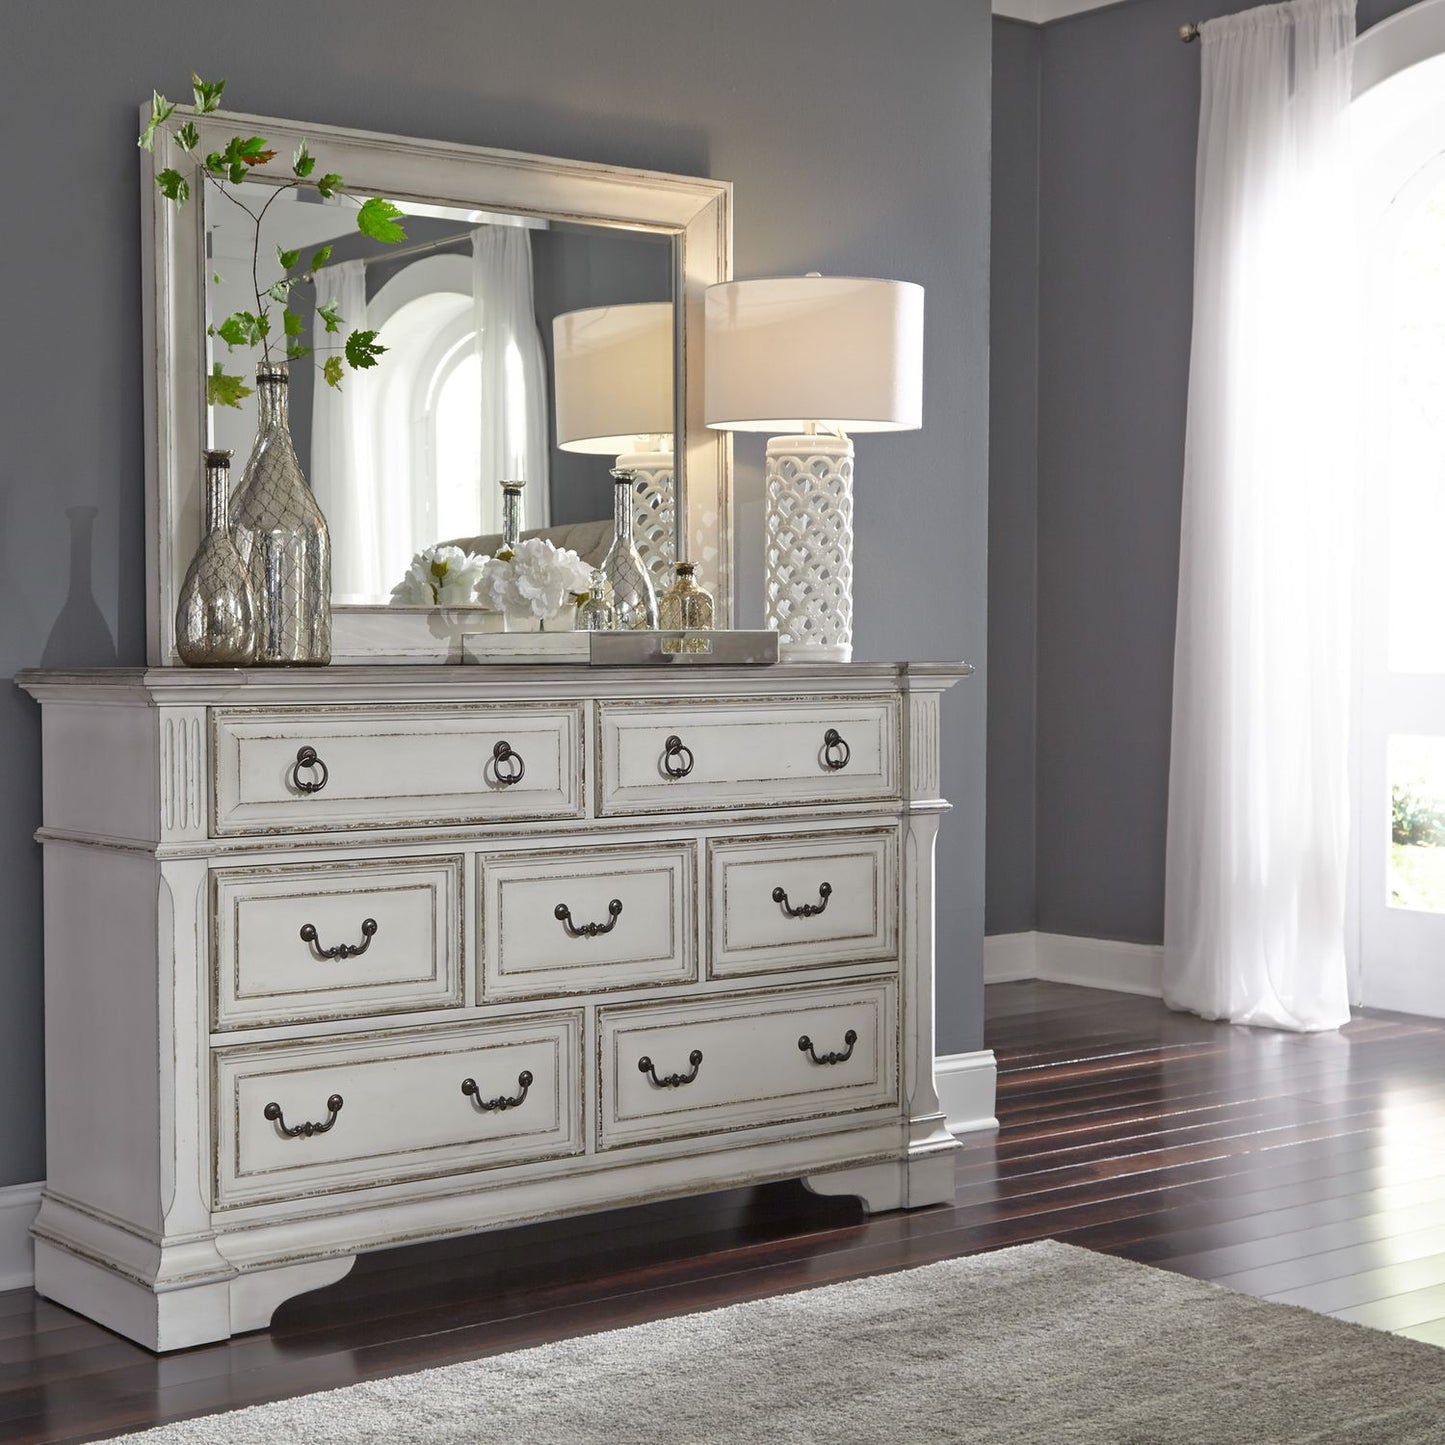 Abbey Park - King California Panel Bed, Dresser & Mirror, Chest